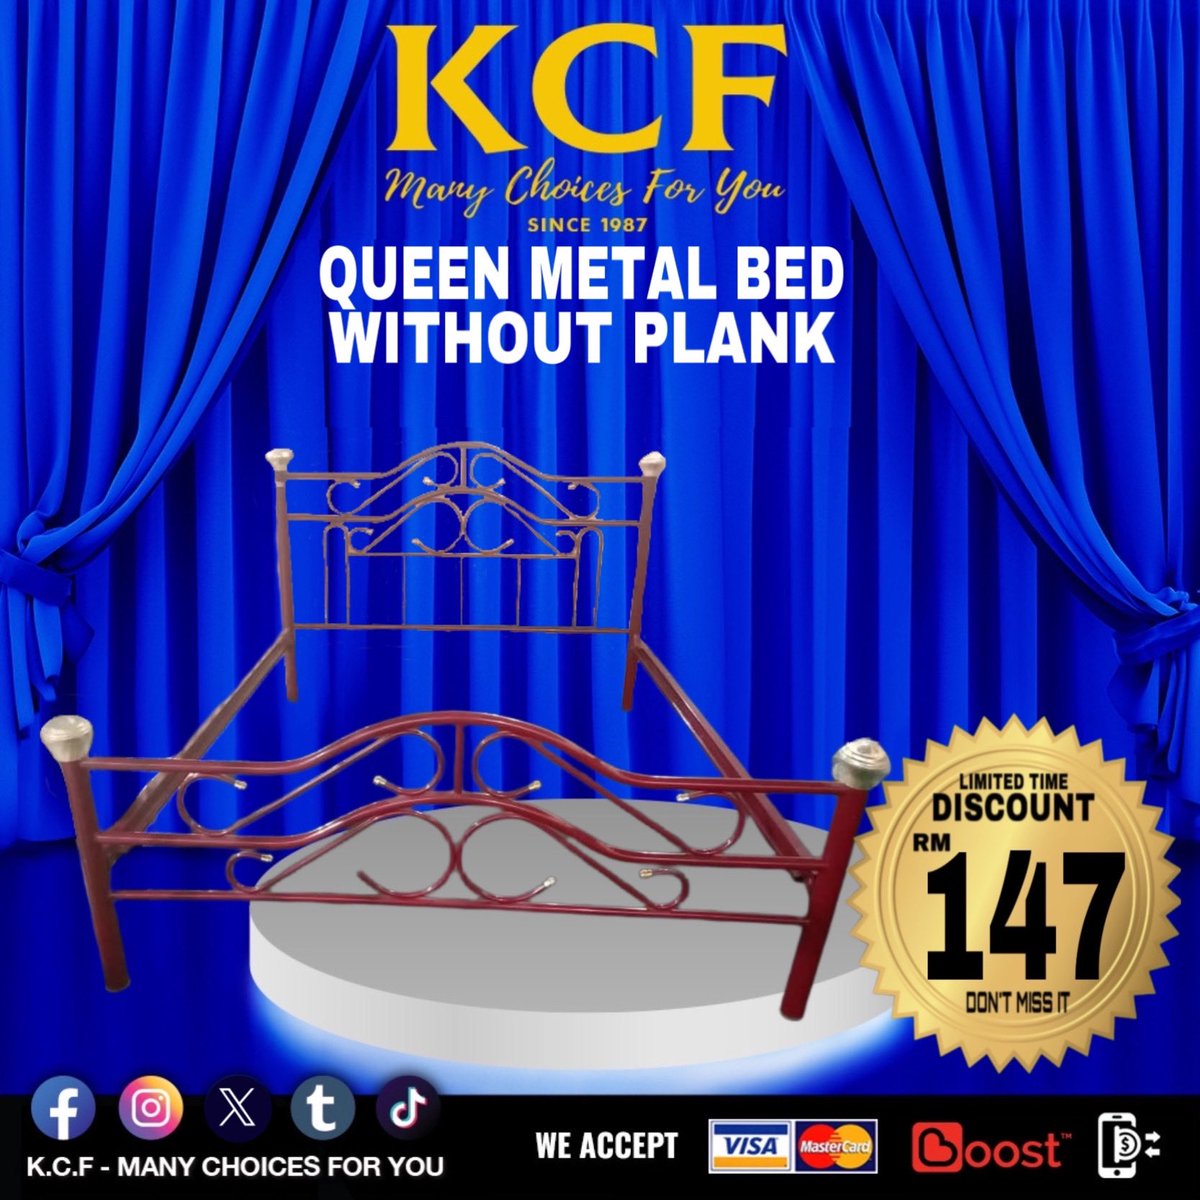 #NewProduct 🔥 

#MetalQueenBed #RM147
 
❤️🧡💛💚💙💜🖤🤍🤎

#KCF💗

 #ManyChoicesForYou💘

#Boost ✅ are available.

#DebitCard ✅, #CreditCard ✅and 
#OnlineBanking ✅ are acceptable.

#Installment ✅0% interest for #PublicBank creditcard member. 

#Whatsapp 📲 > 014-555 6698